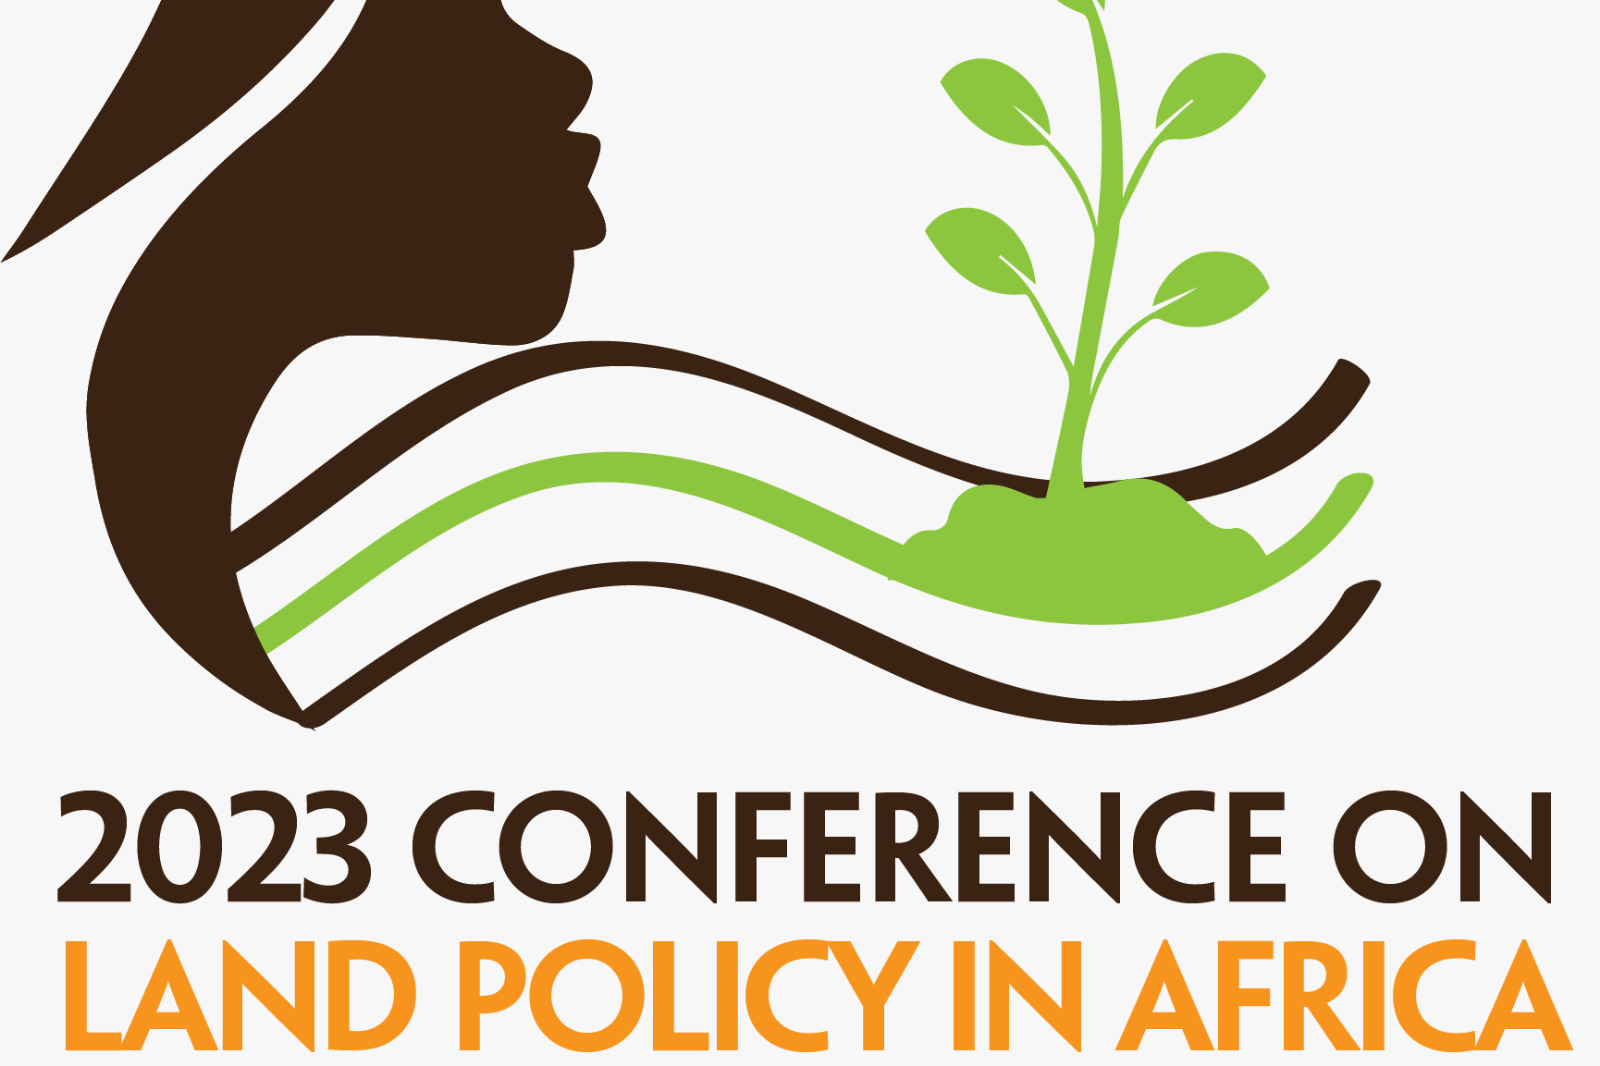 Preparations for 2023 Conference on Land Policy in Africa underway